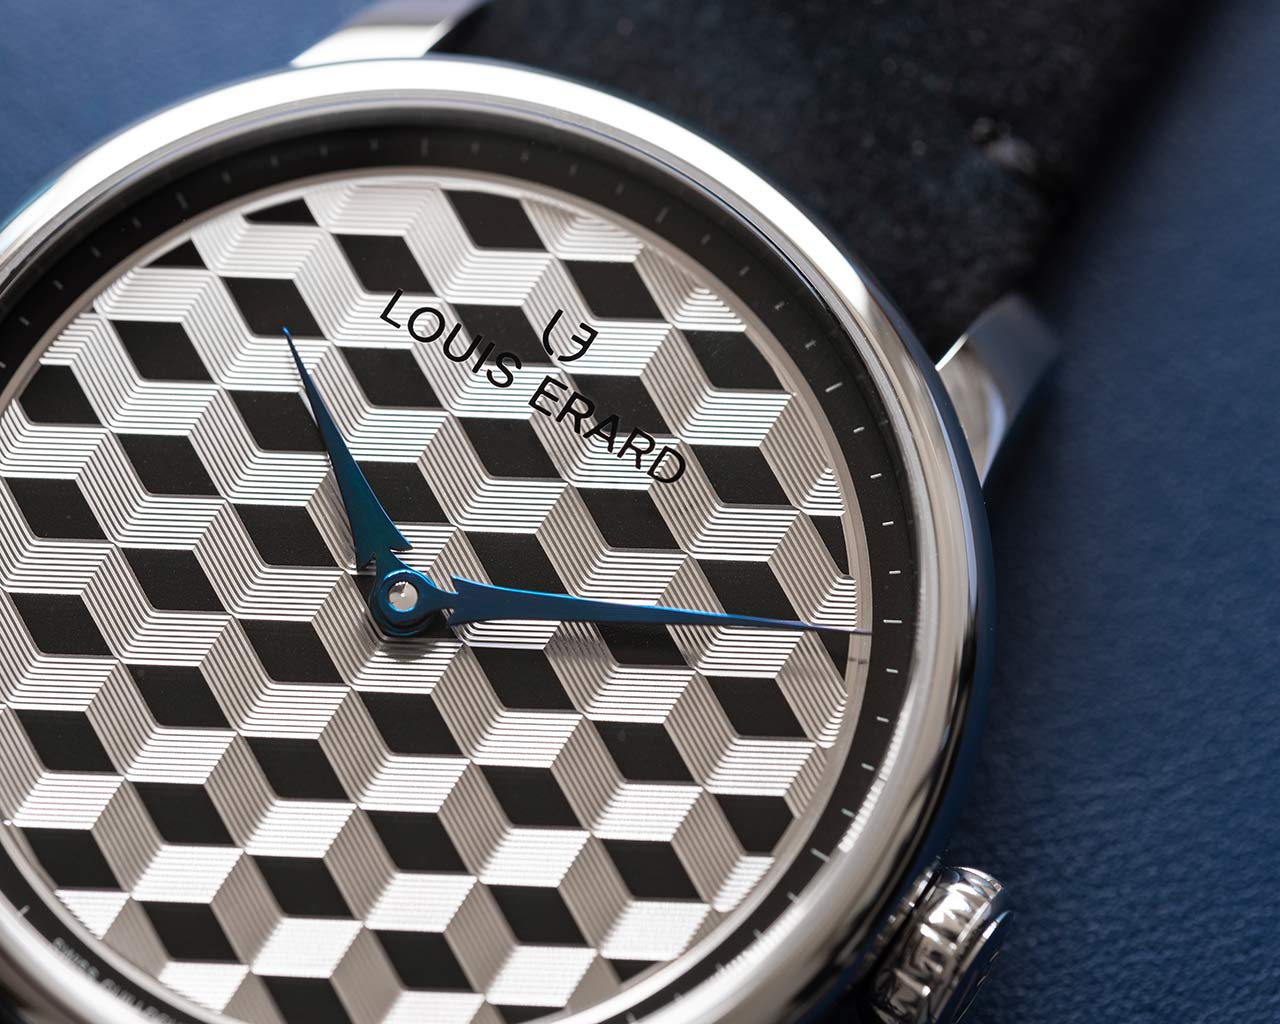 Louis Erard Introduces its First Watch With Enamel Dial